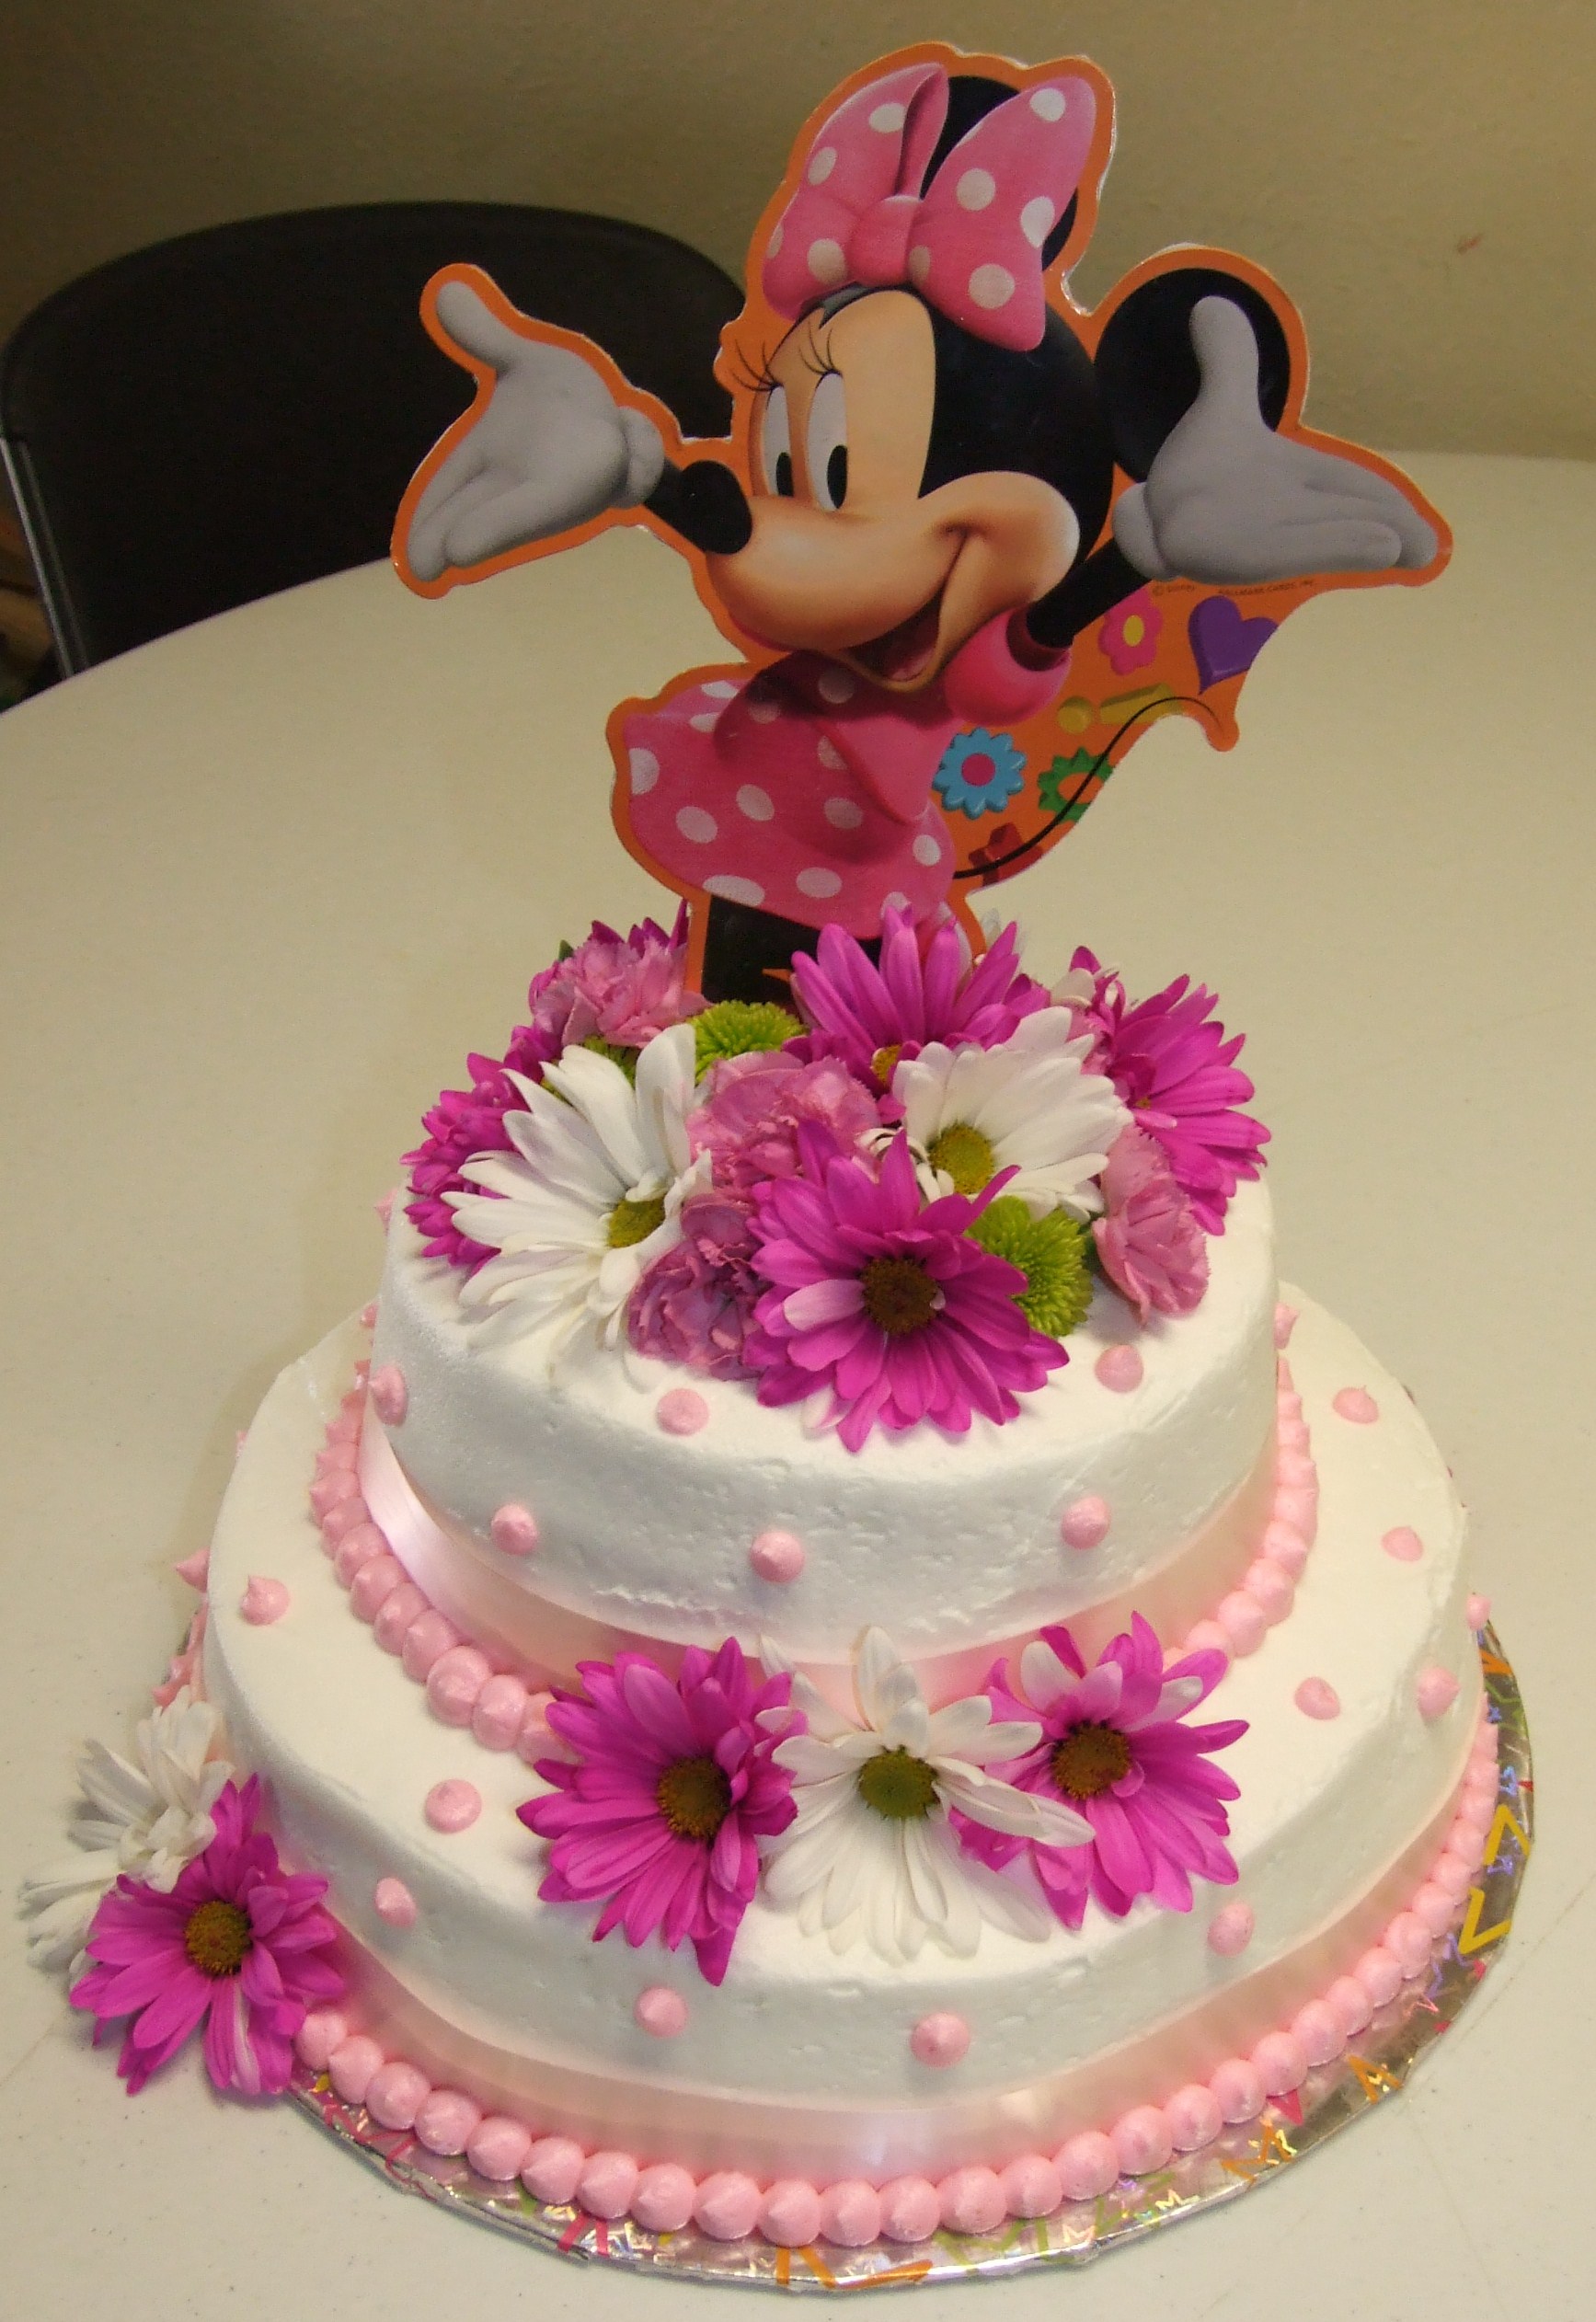 Minni Mouse cake with fresh flowers....